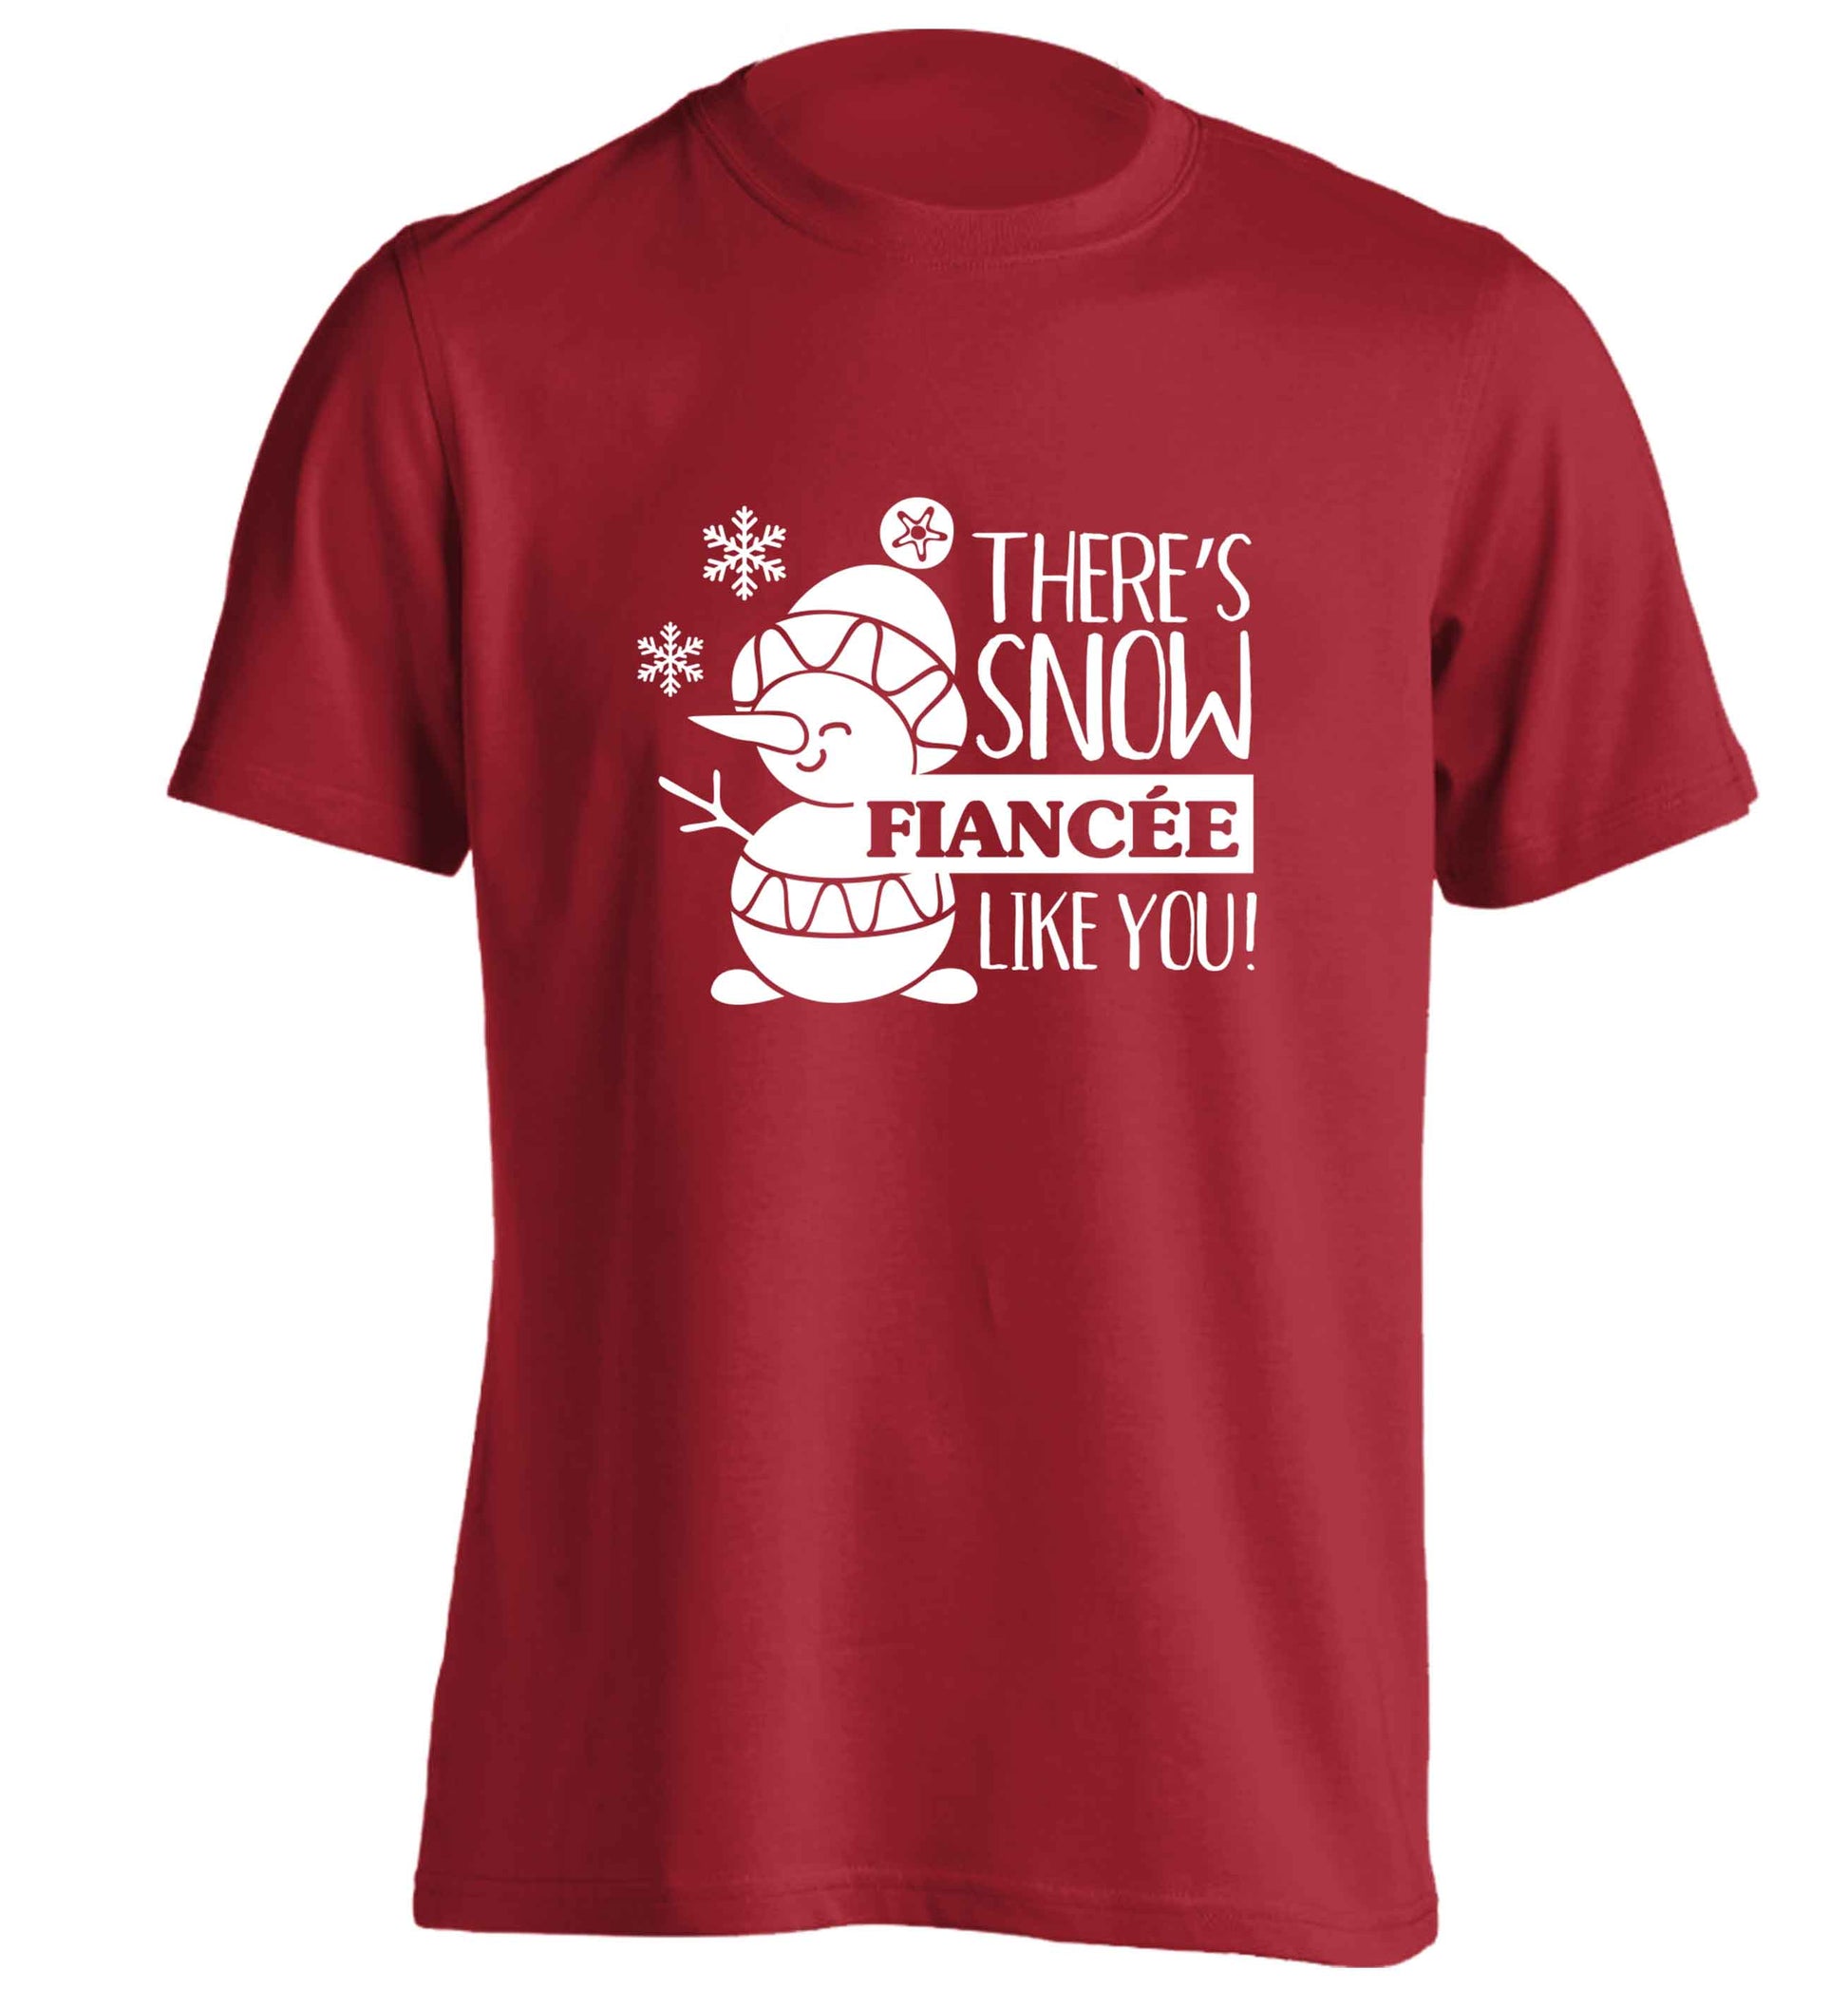 There's snow fiancee like you adults unisex red Tshirt 2XL